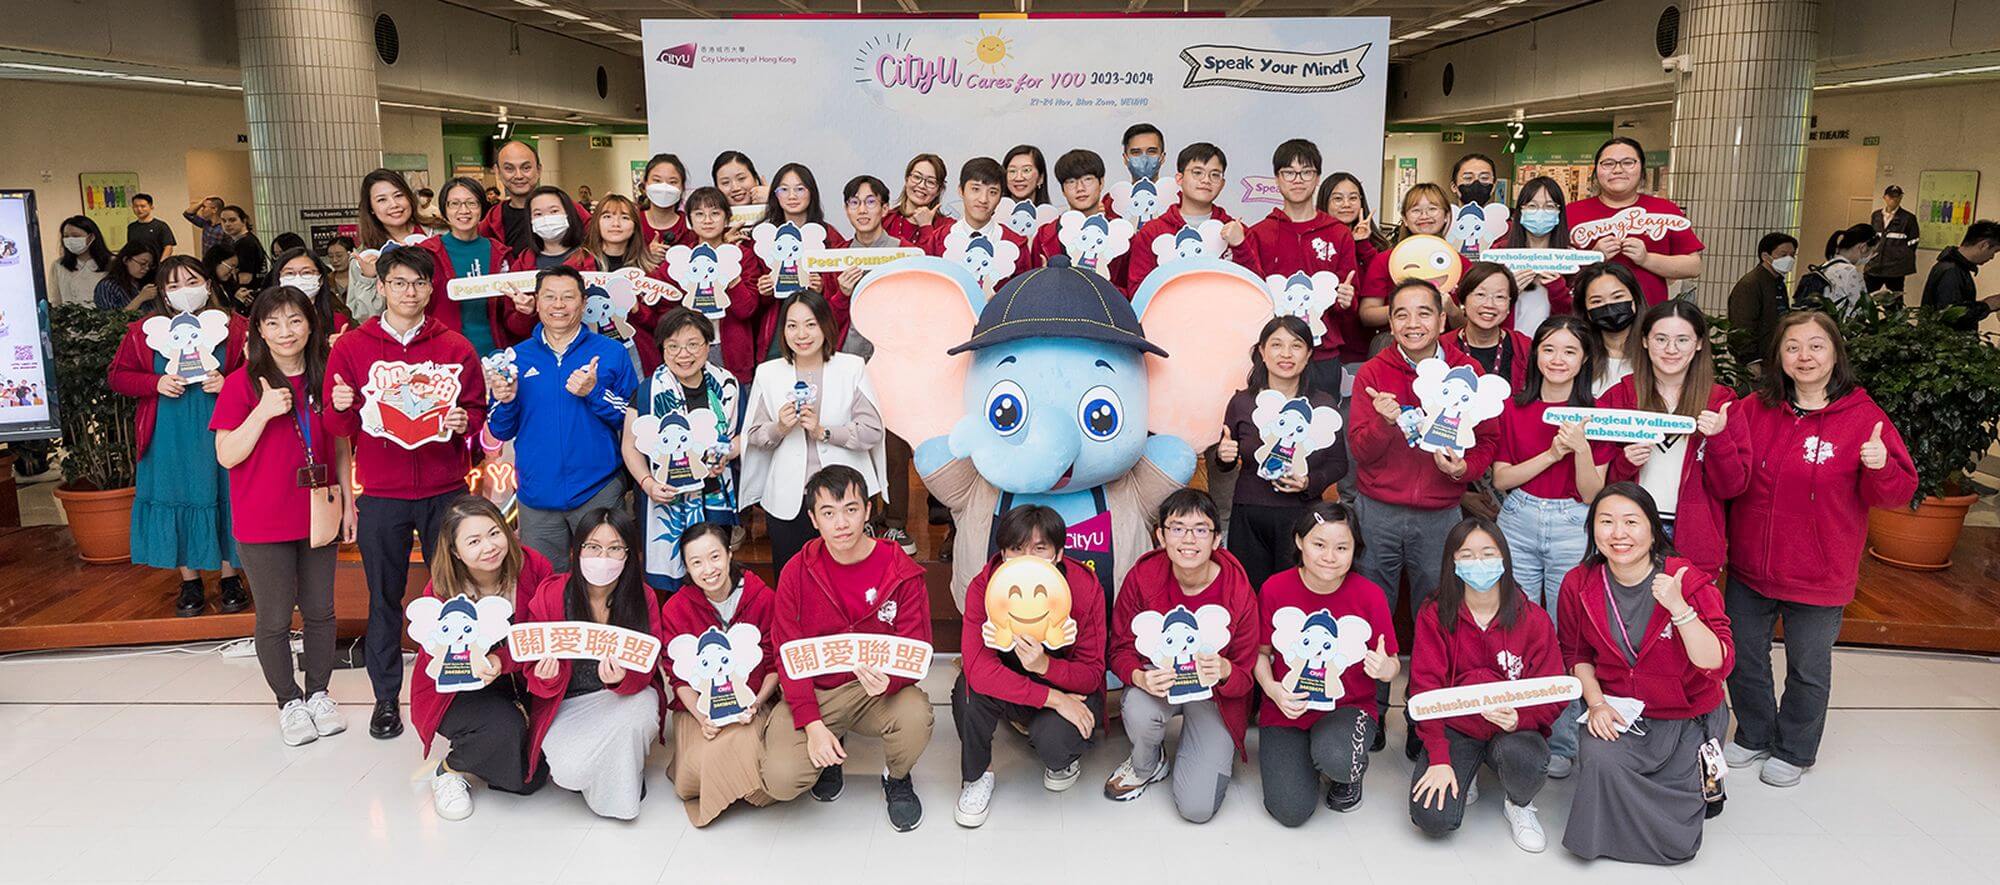 “CityU Cares for YOU 2023-2024 ” campaign was launched to provide care and support for students encountering academic challenges during this period of the academic year.